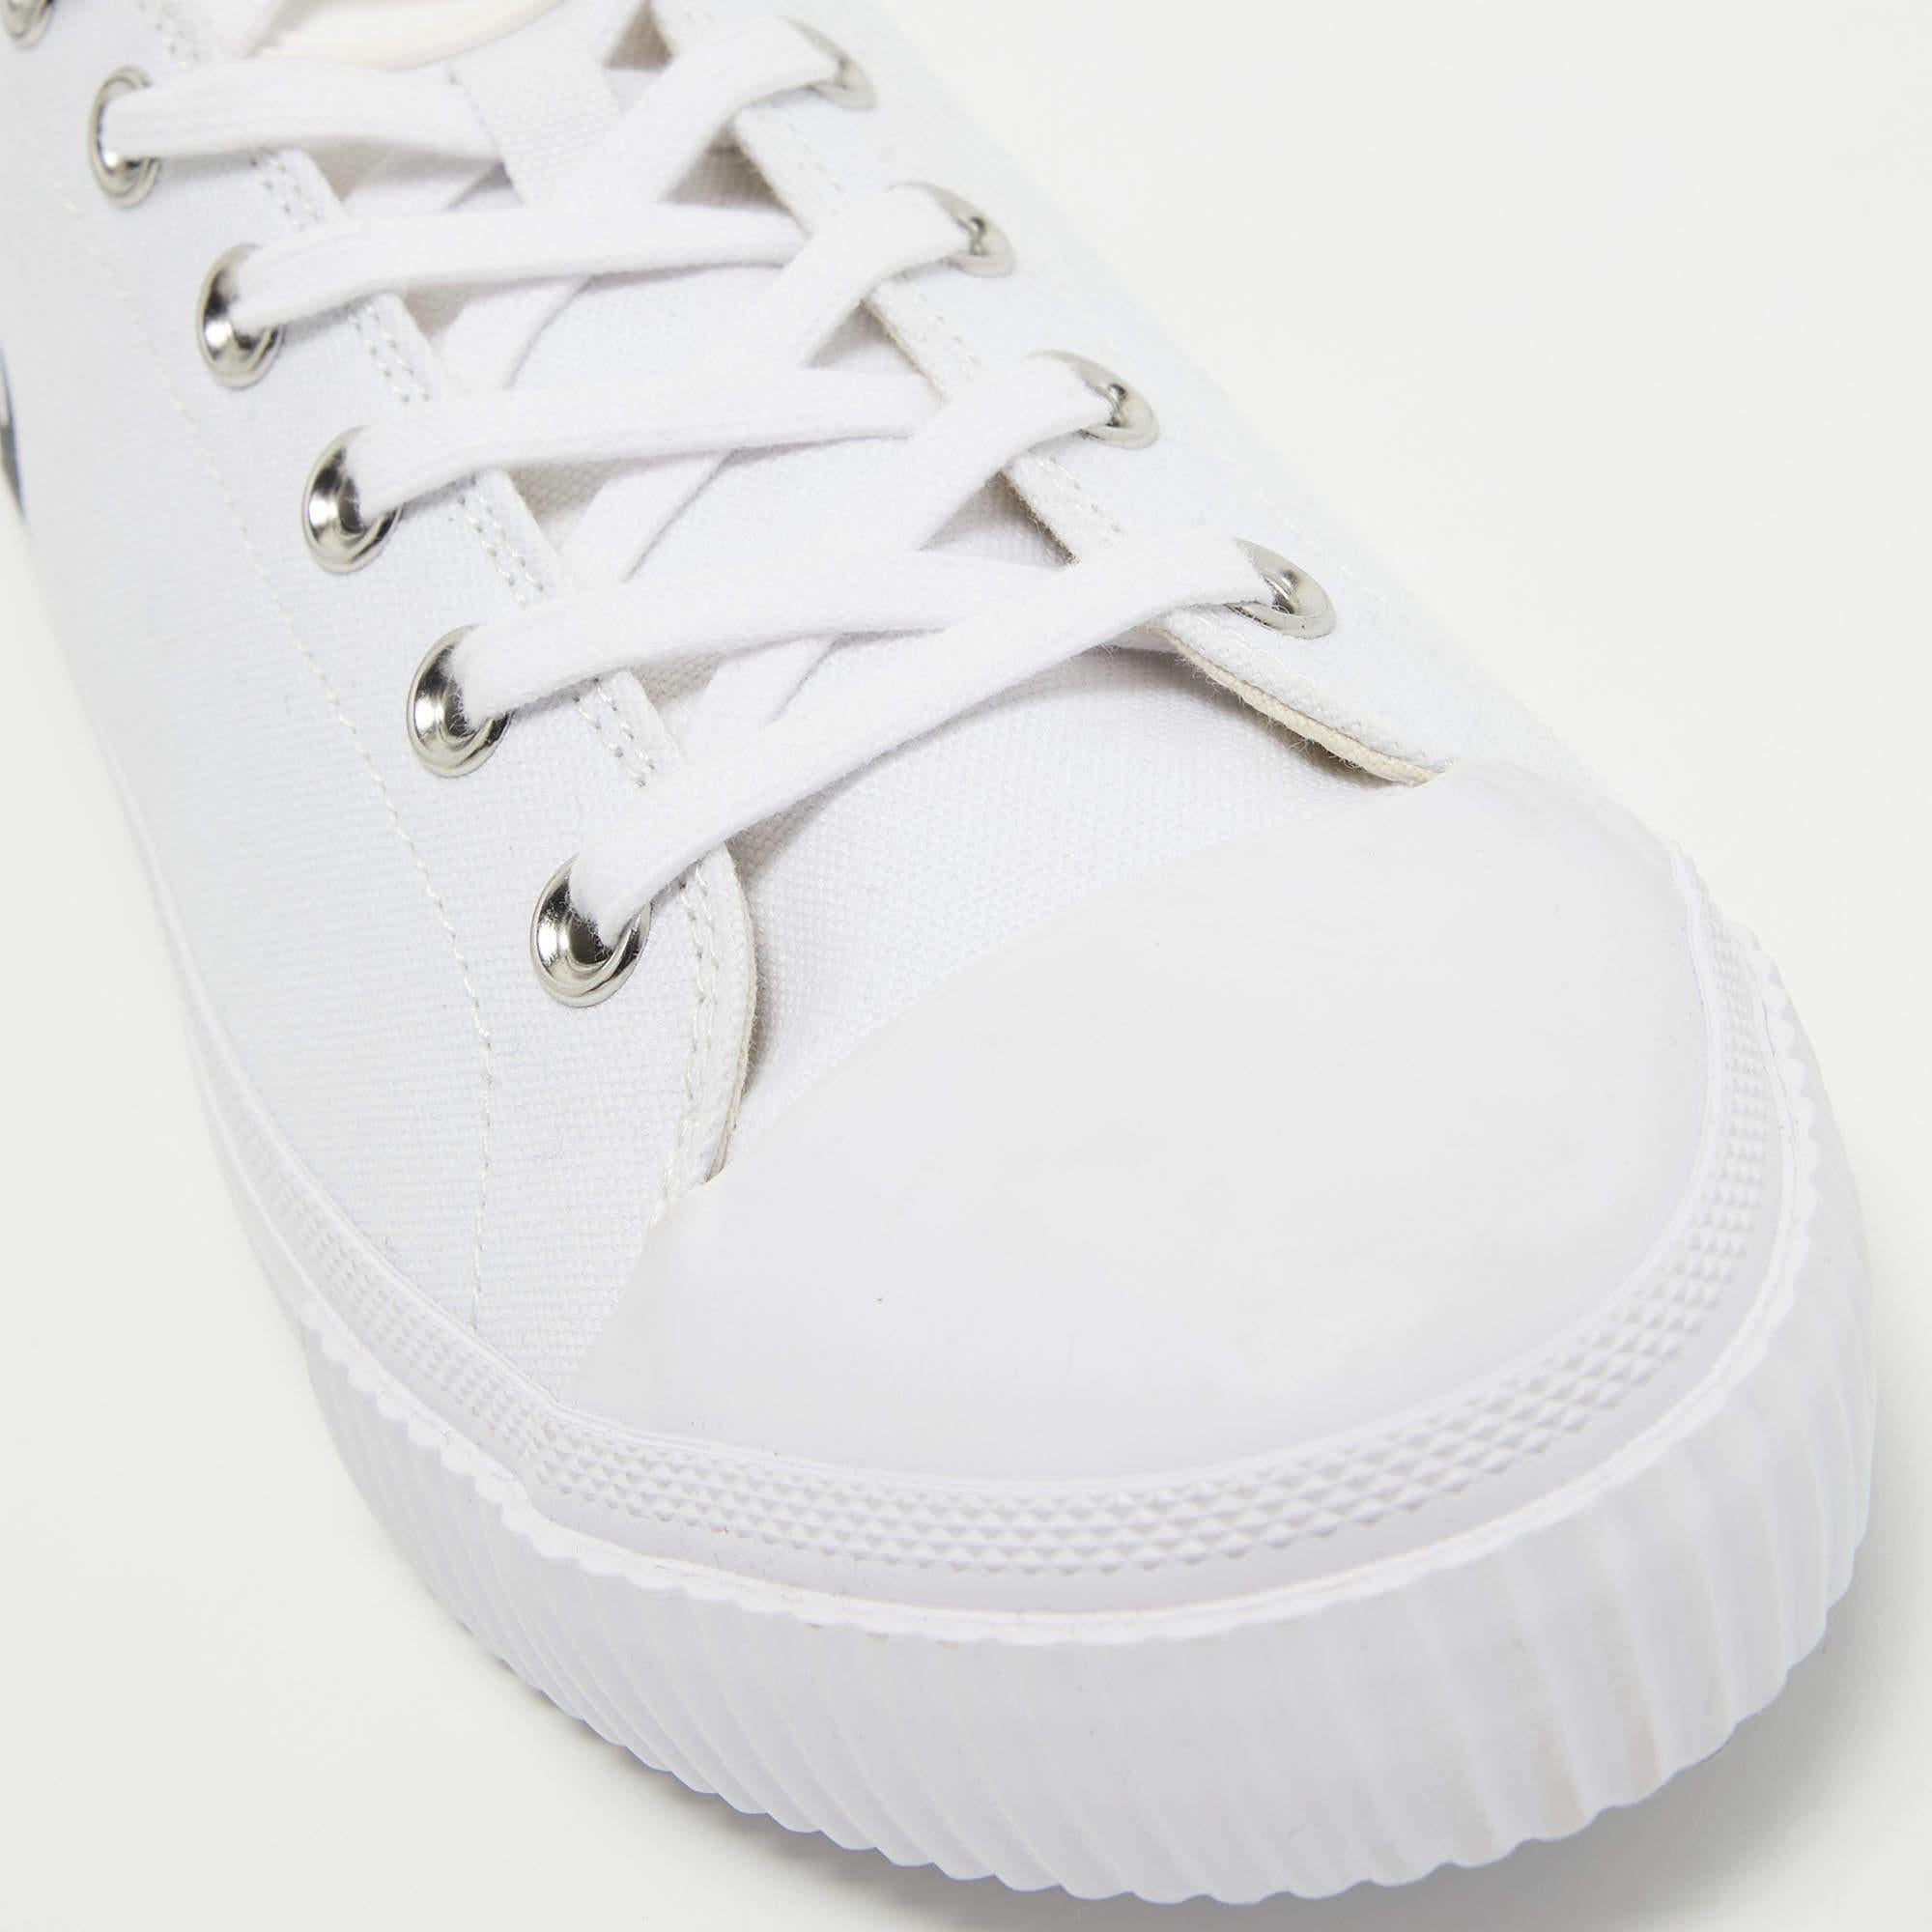 Gray McQ by Alexander McQueen White Canvas Swallow Sneakers Size 44